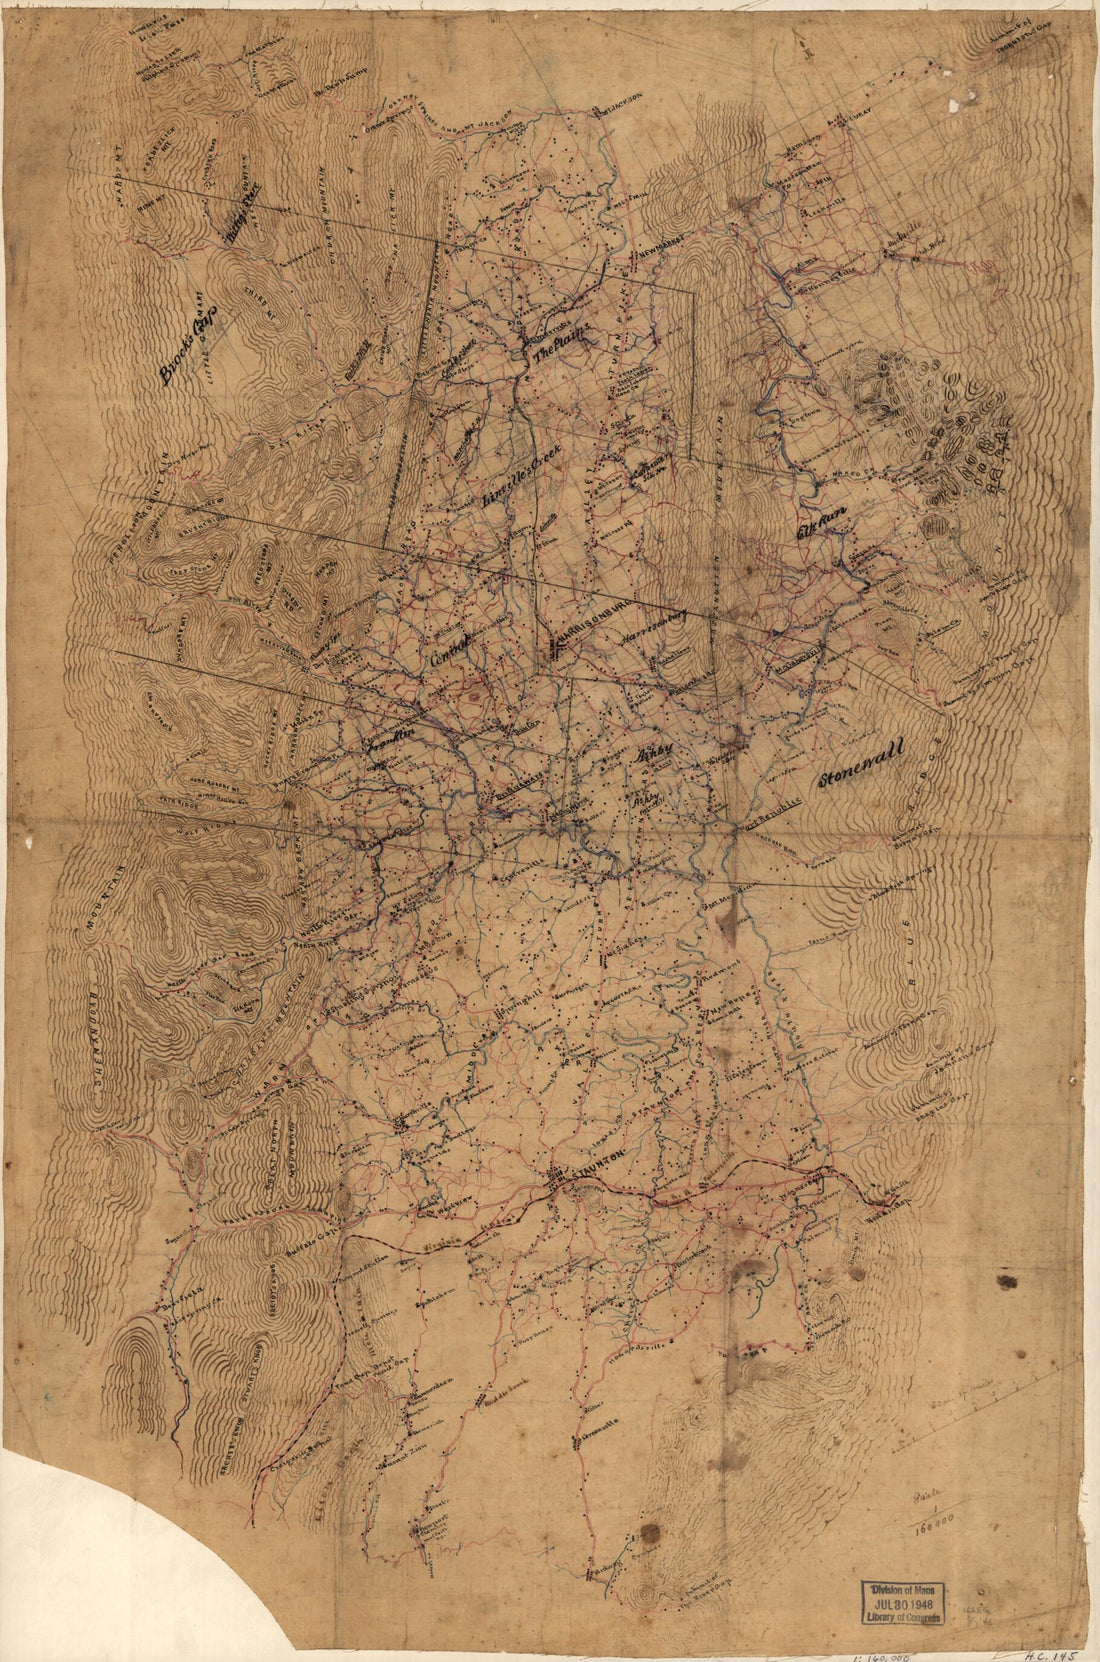 This old map of Map of the Shenandoah Valley from Mt. Jackson to Midway, Including Parts of Shenandoah, Page, Rockingham, and Augusta Counties, Virginia from 1860 was created by  in 1860